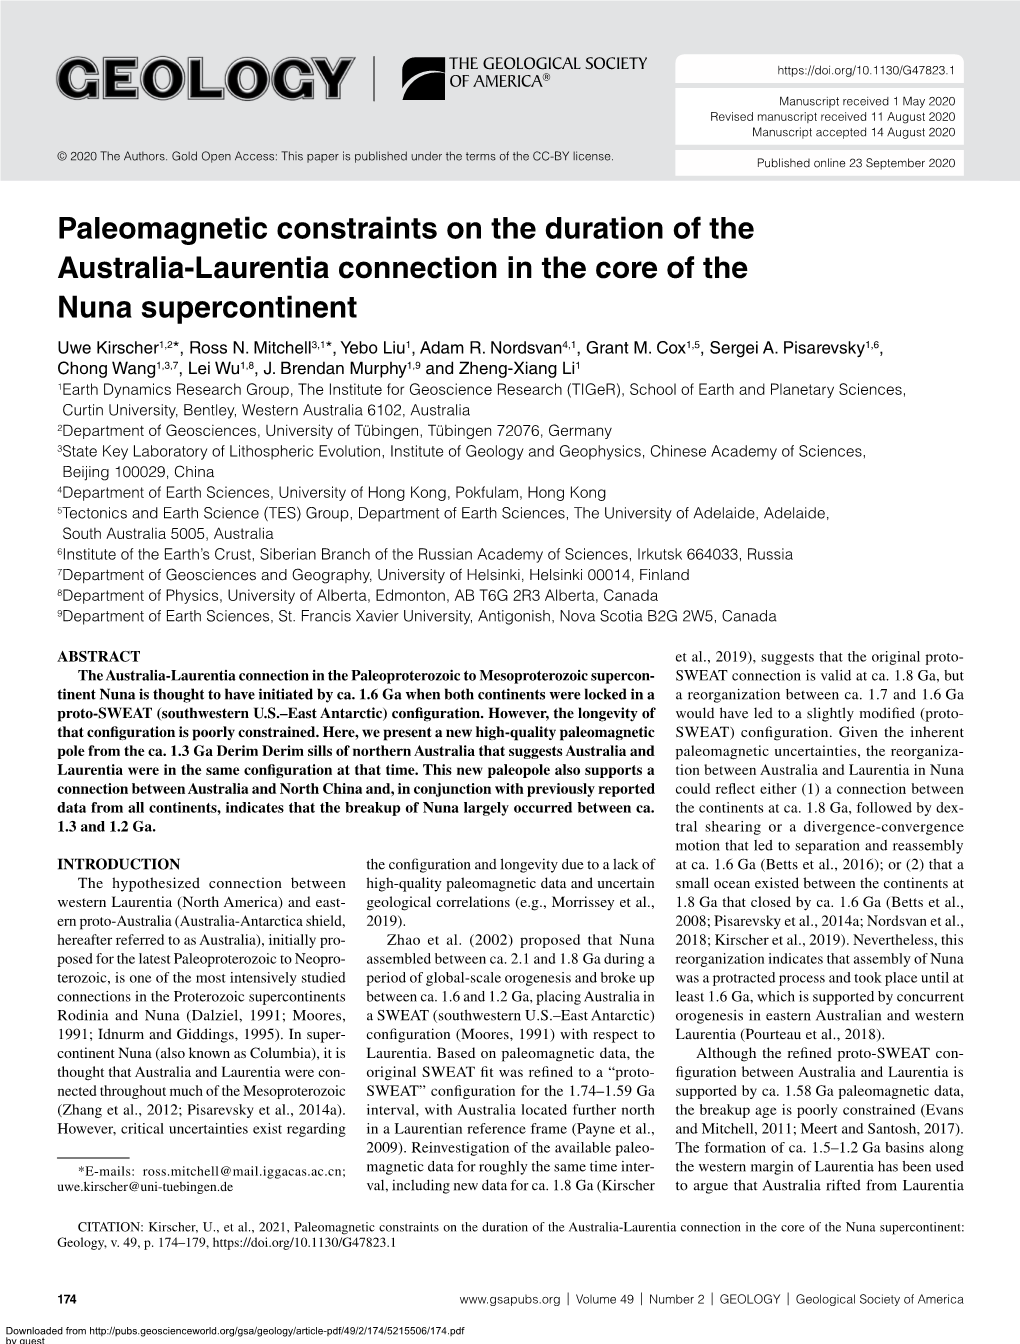 Paleomagnetic Constraints on the Duration of the Australia-Laurentia Connection in the Core of the Nuna Supercontinent Uwe Kirscher1,2*, Ross N